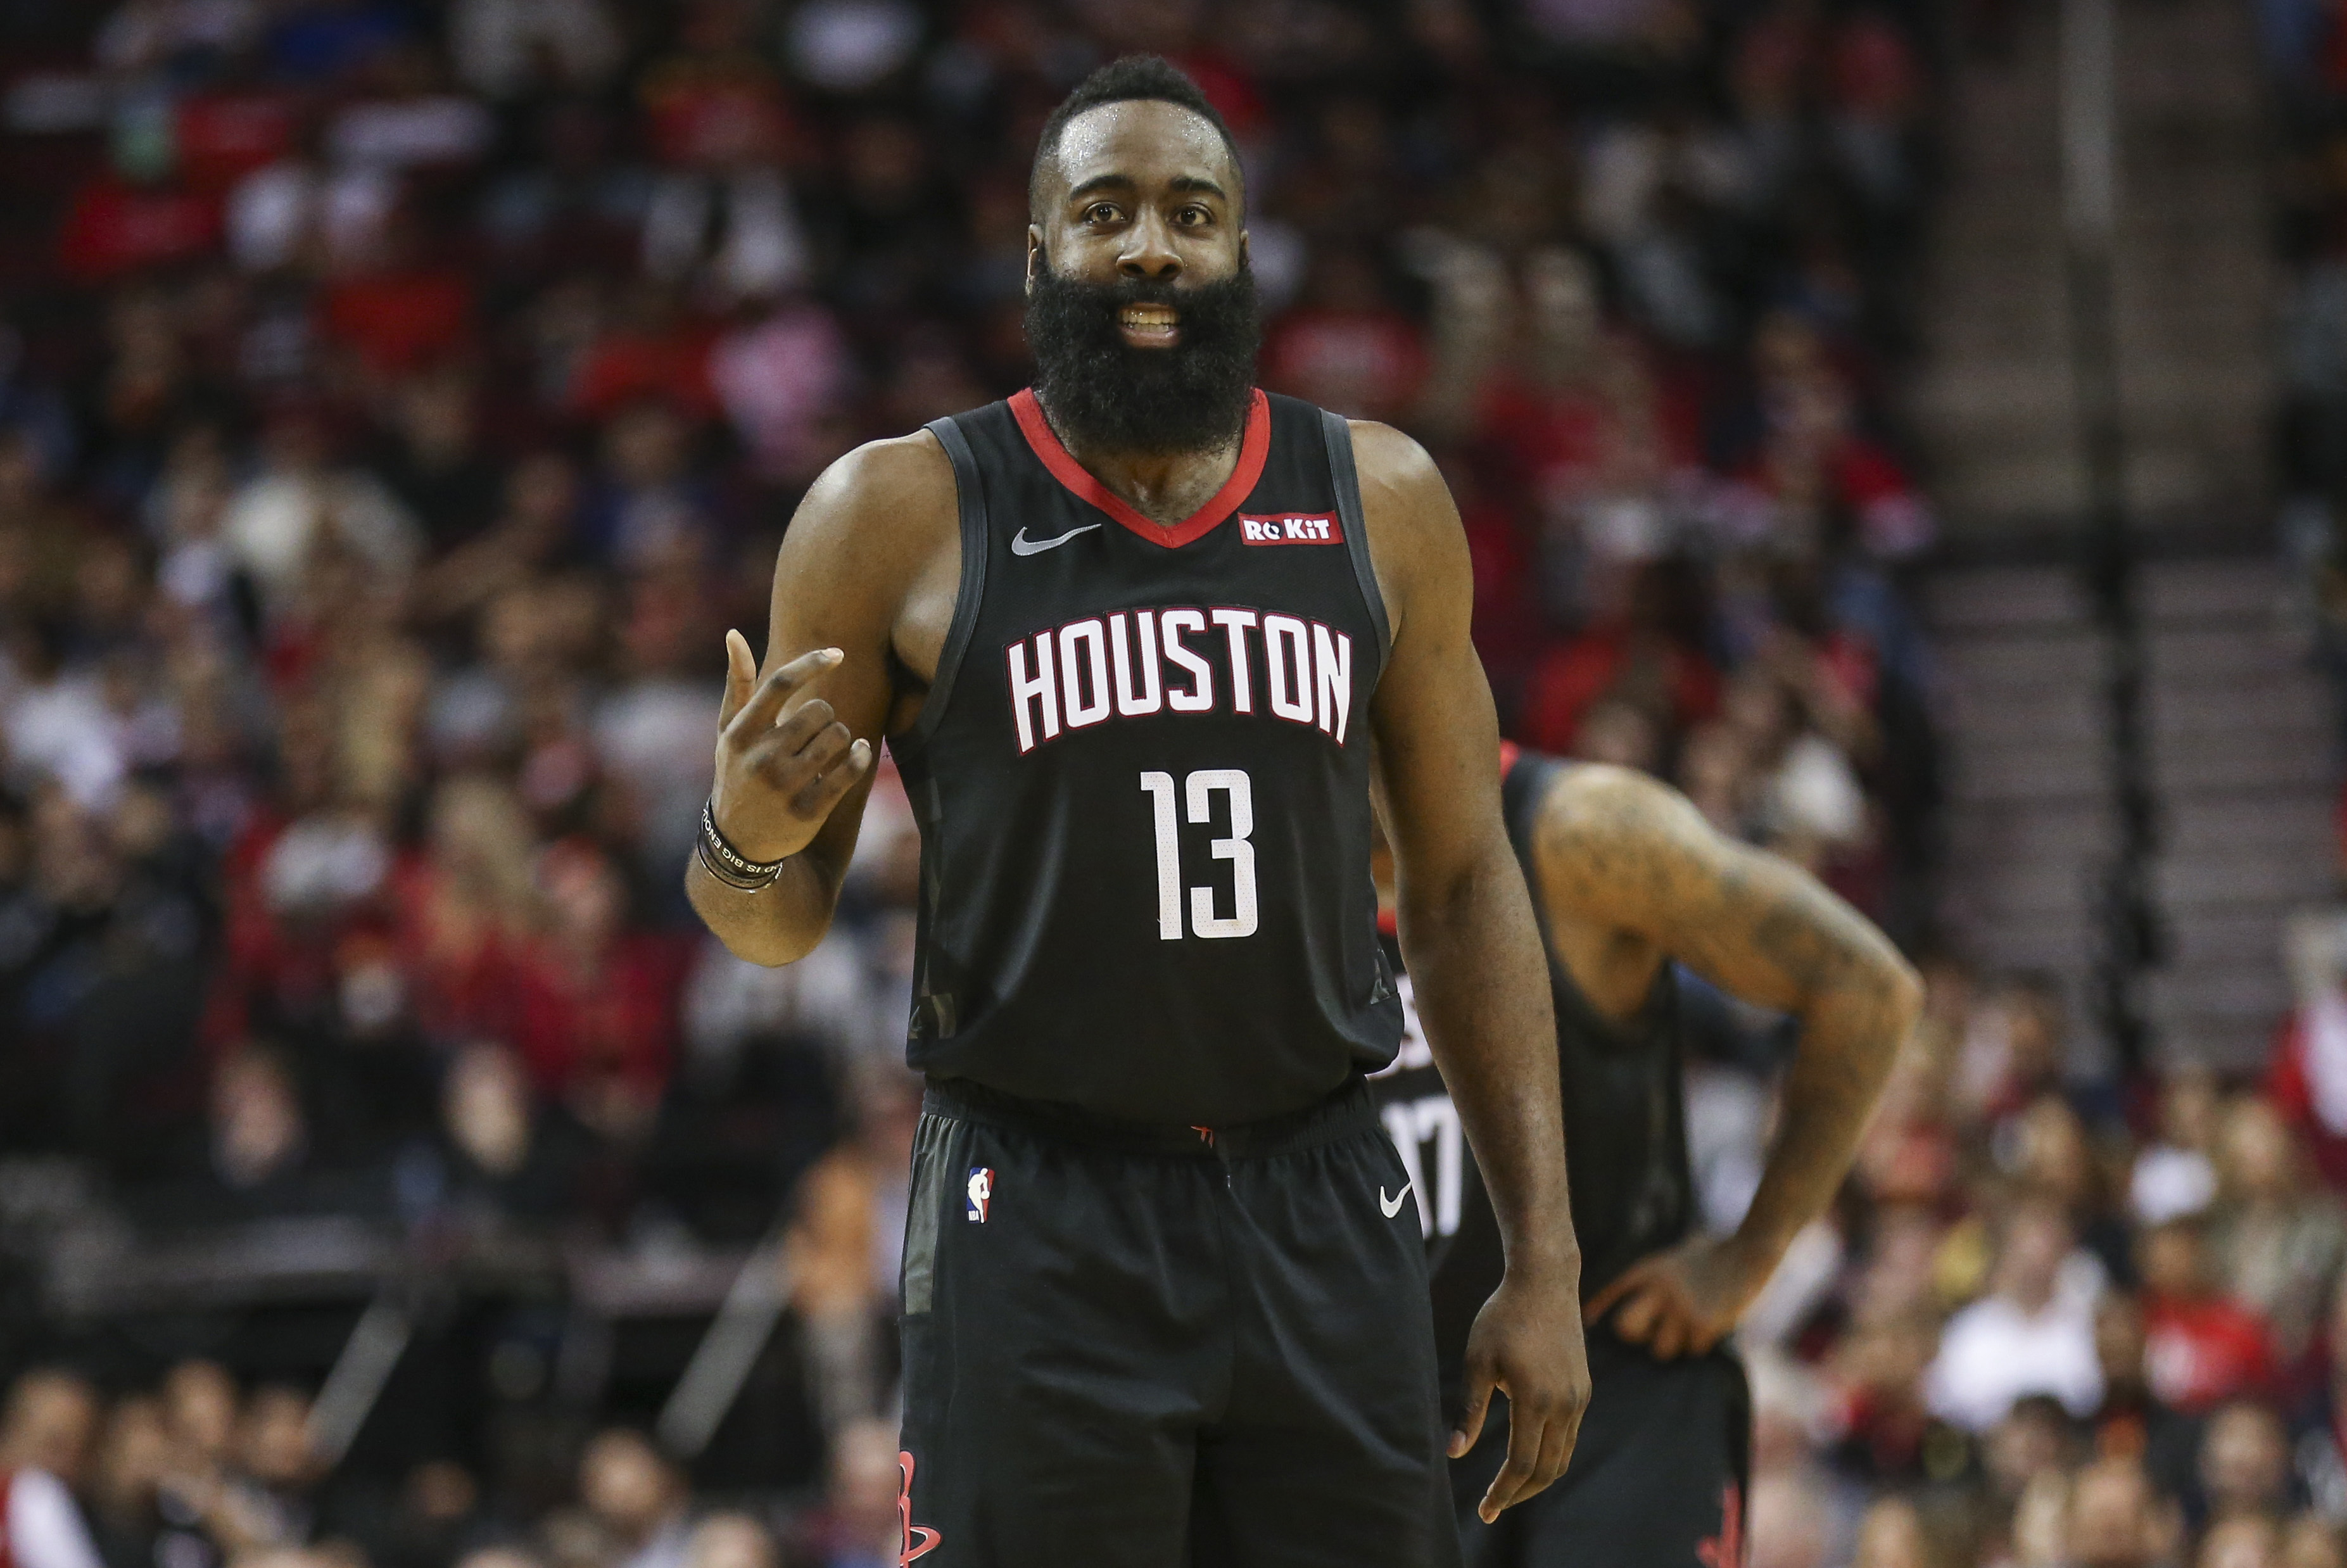 Dec 17, 2018; Houston, TX, USA; Houston Rockets guard James Harden (13) reacts after a play during the third quarter against the Utah Jazz at Toyota Center. Mandatory Credit: Troy Taormina-USA TODAY Sports